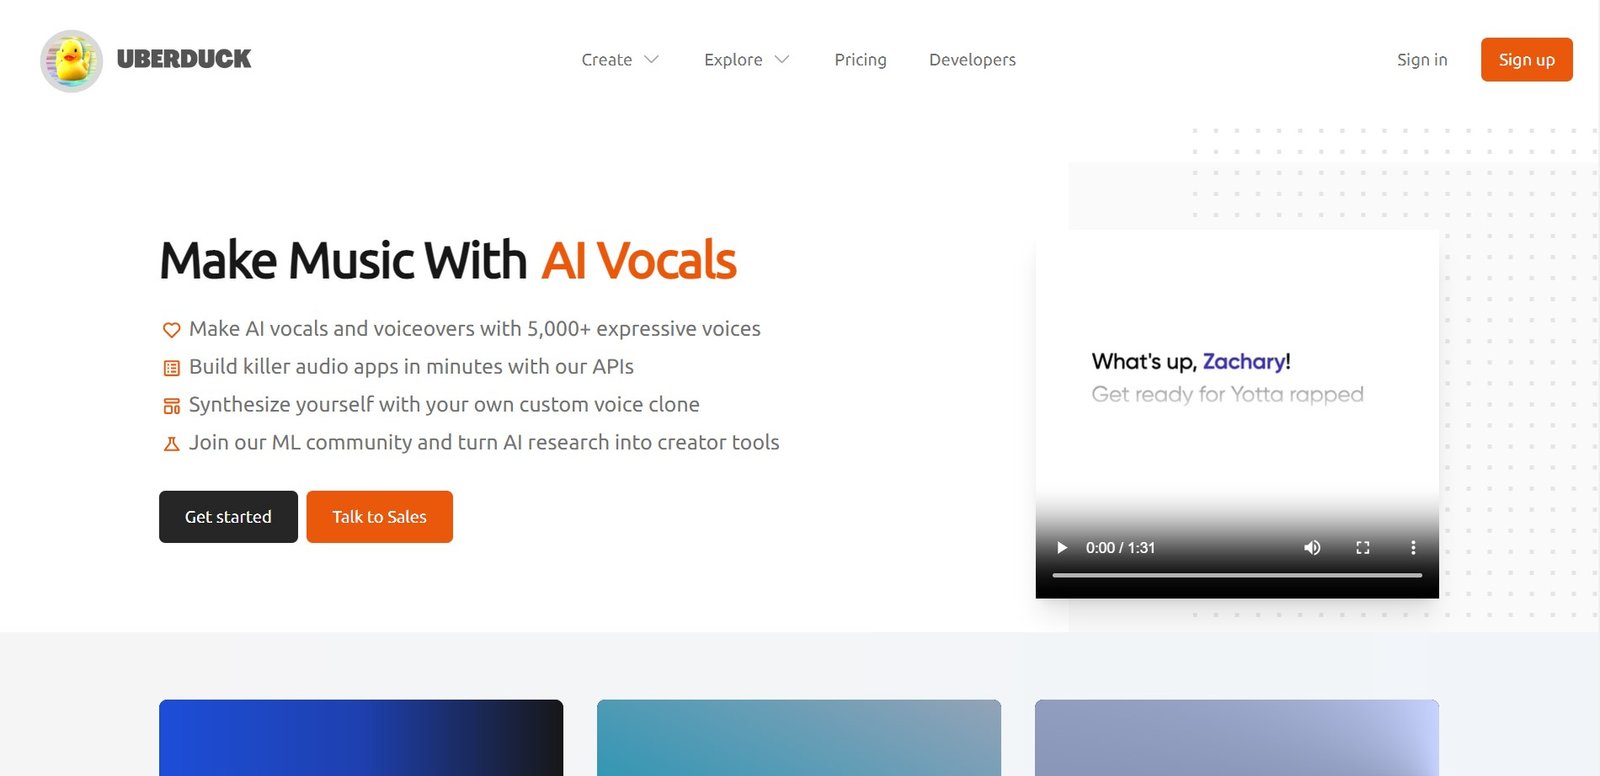 UberDuck is an AI vocal synthesis platform that allows users to create high-quality AI vocals and voiceovers 